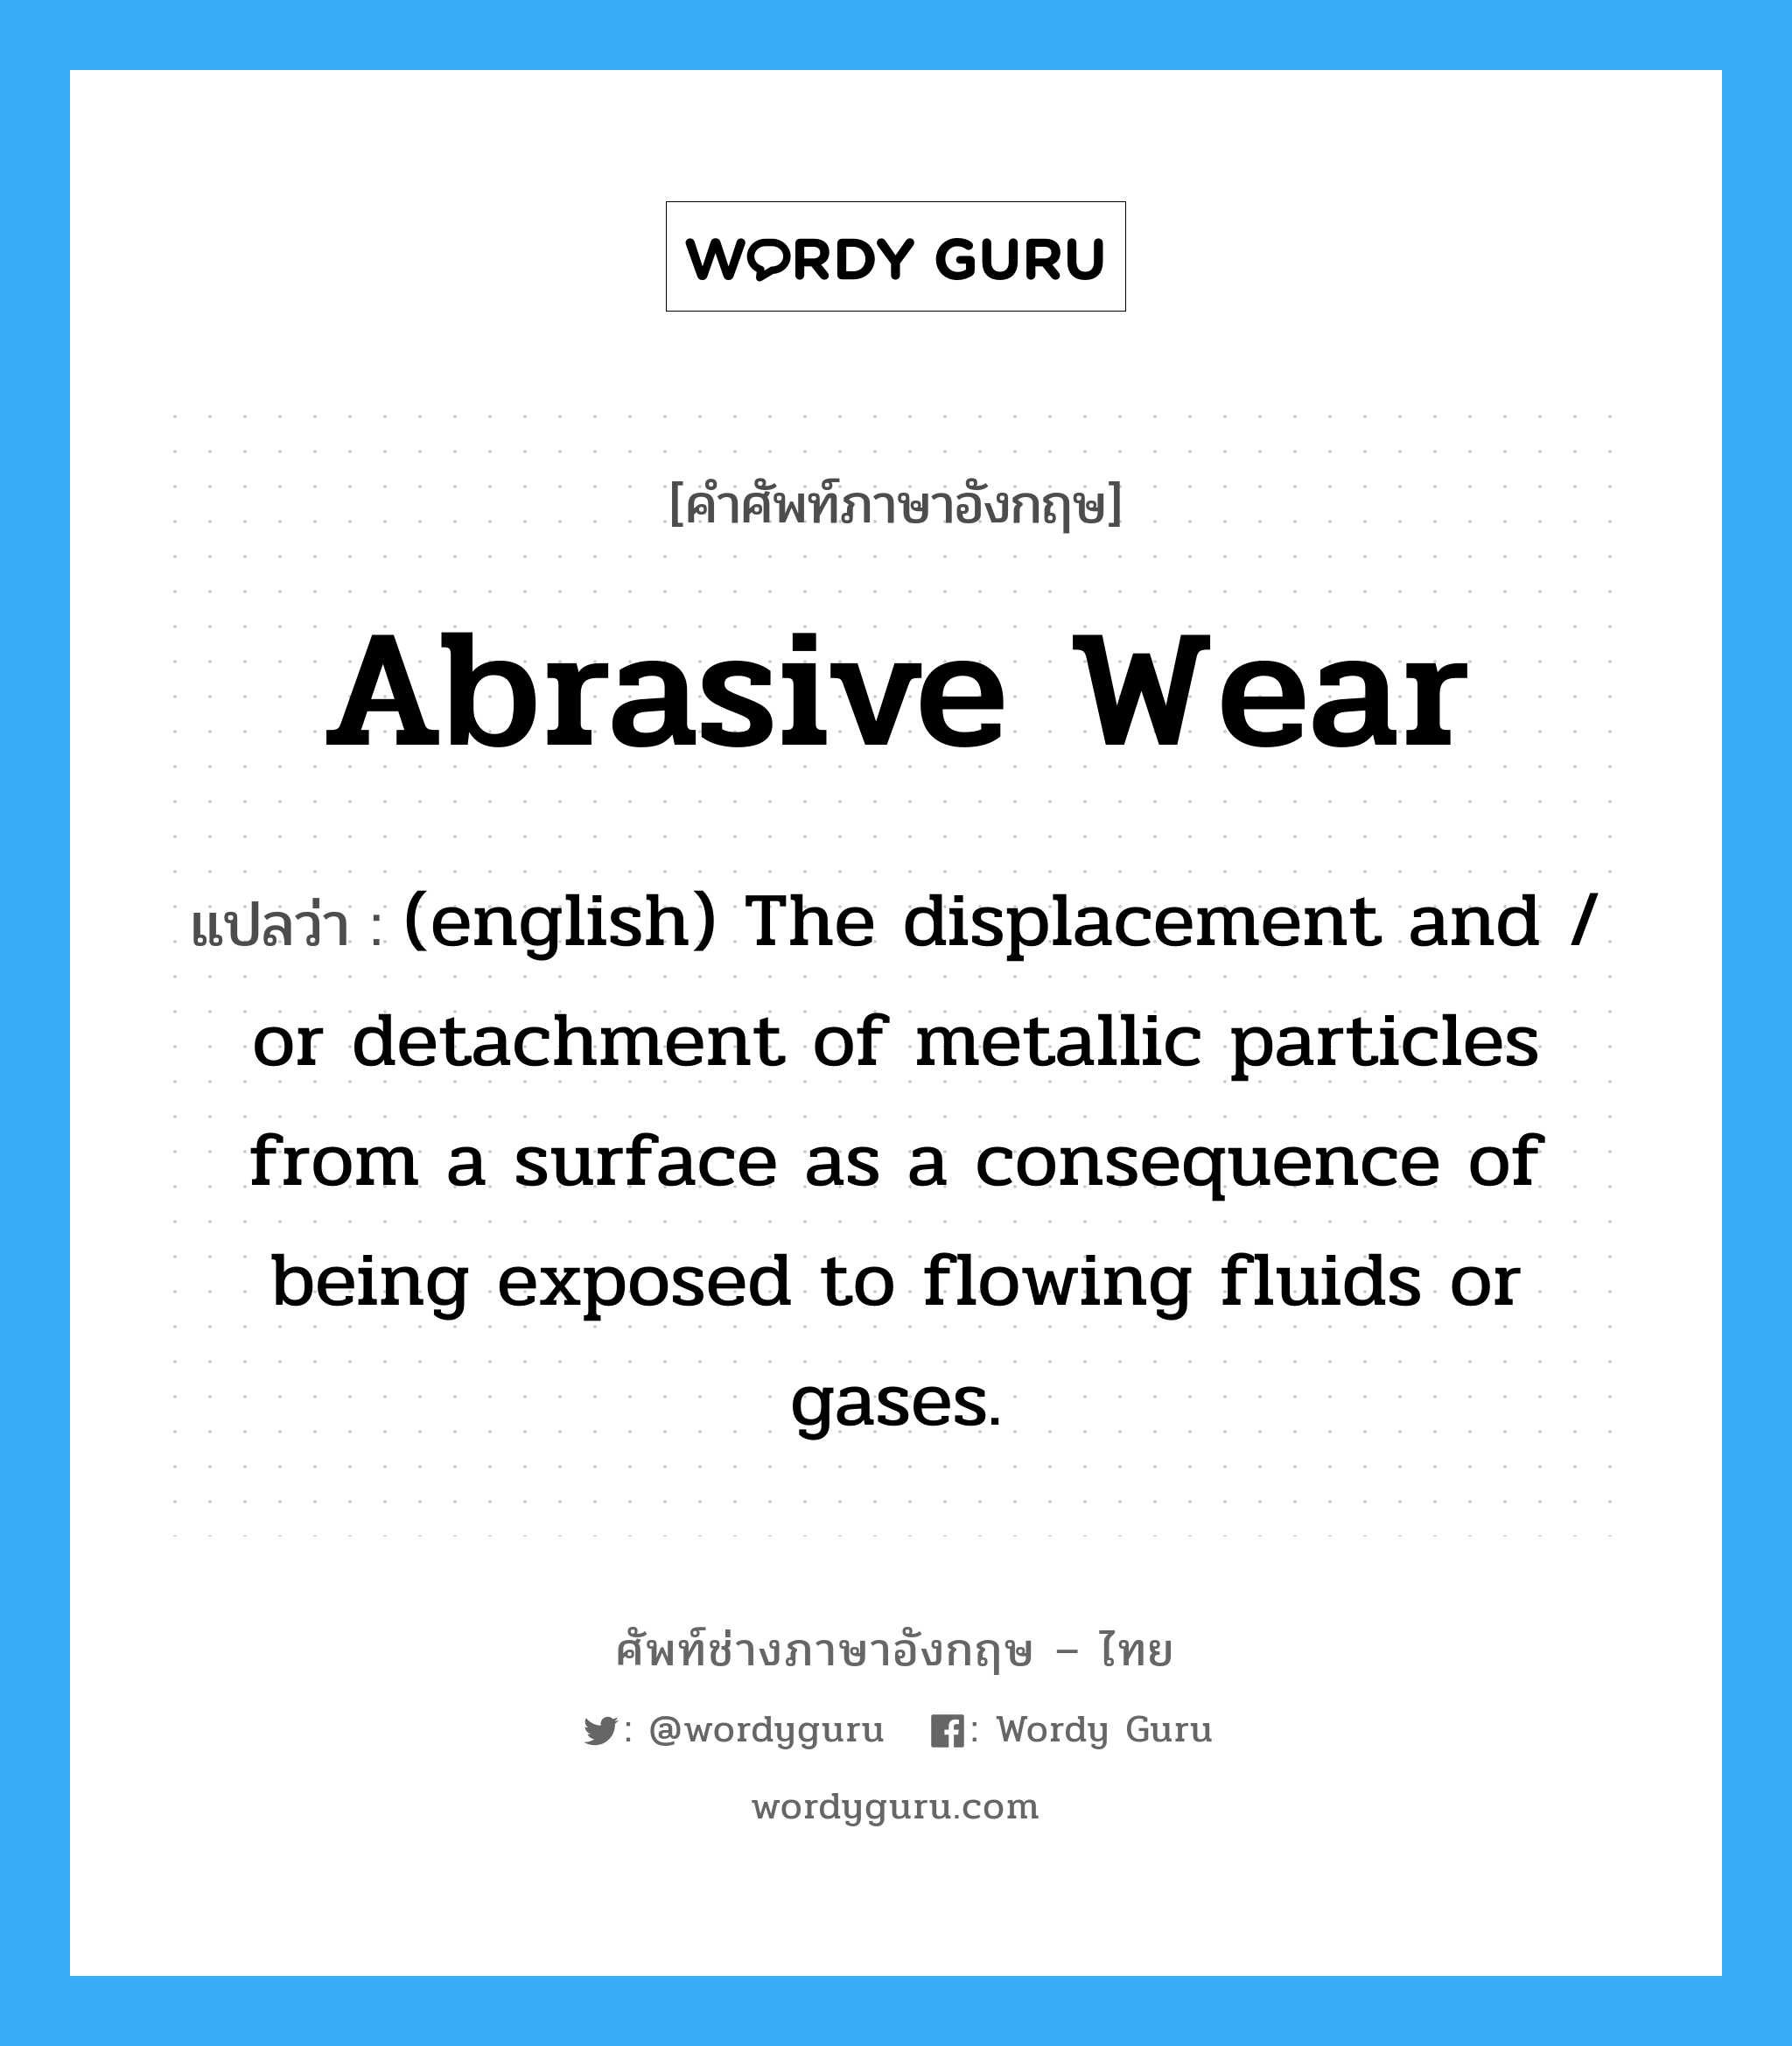 Abrasive Wear แปลว่า?, คำศัพท์ช่างภาษาอังกฤษ - ไทย Abrasive Wear คำศัพท์ภาษาอังกฤษ Abrasive Wear แปลว่า (english) The displacement and / or detachment of metallic particles from a surface as a consequence of being exposed to flowing fluids or gases.